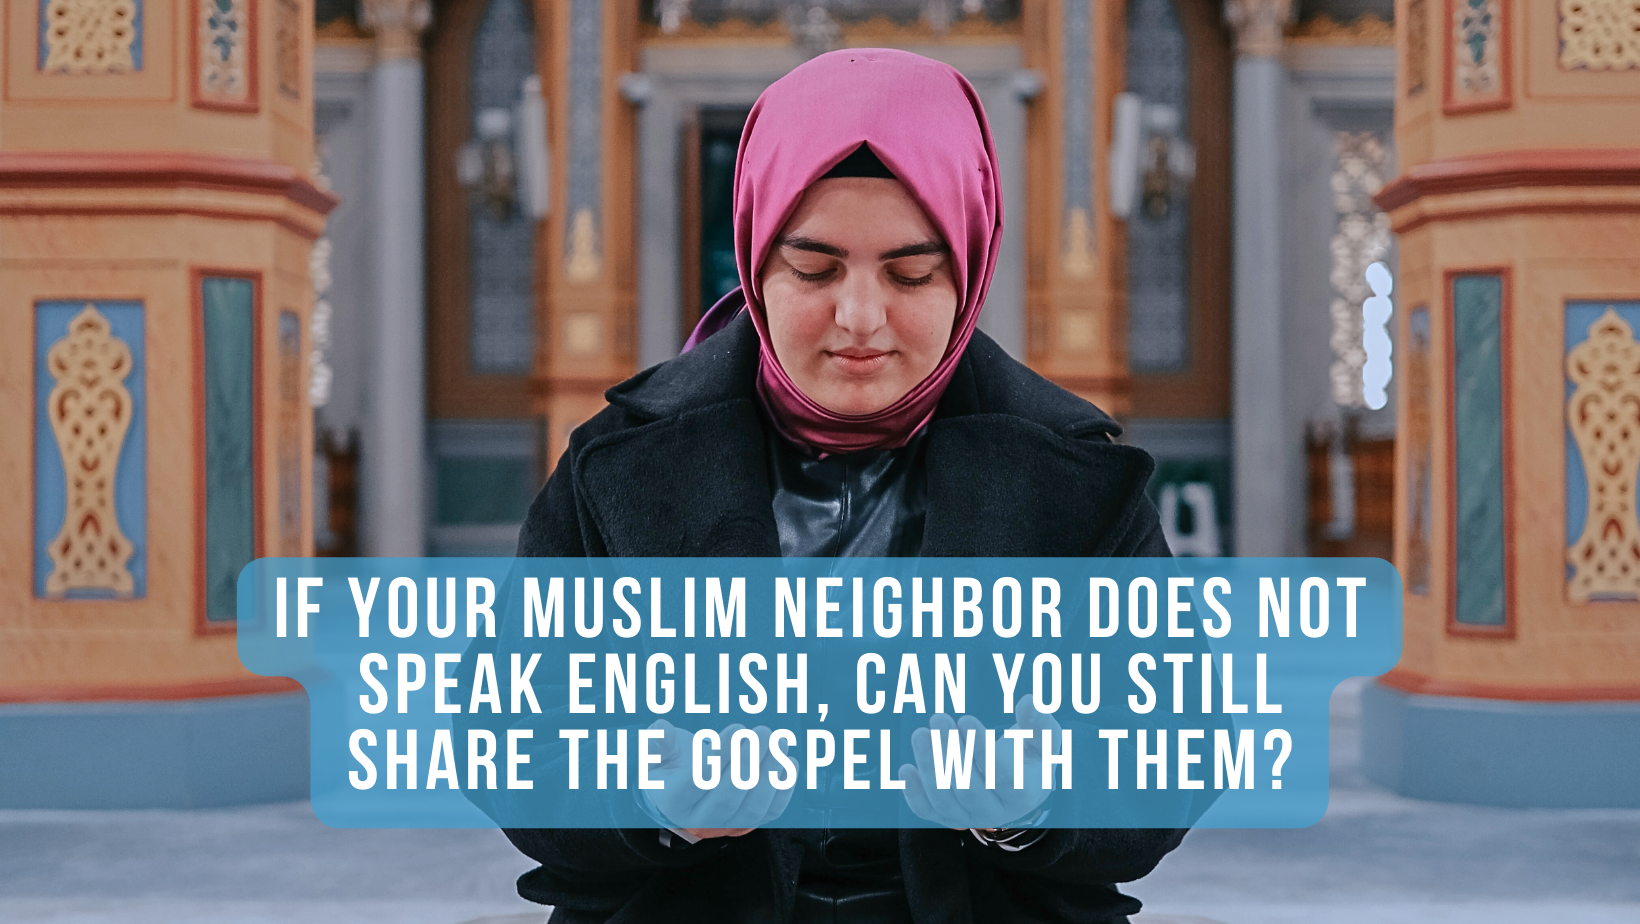 If your Muslim neighbor does not speak English, can you still share the Gospel with them?